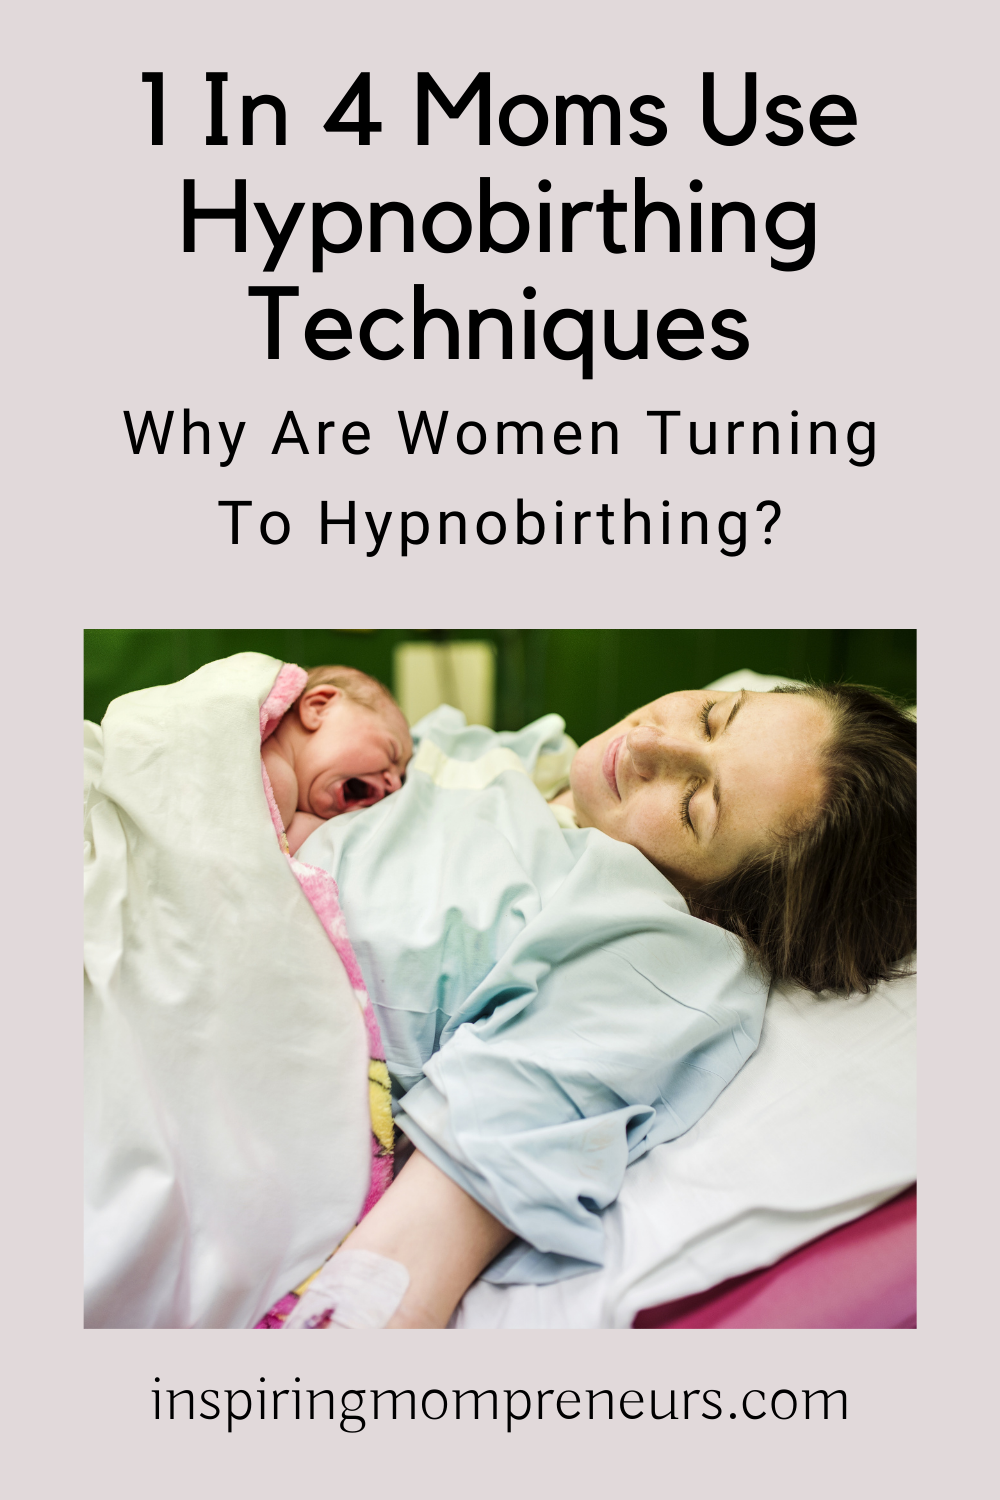 Hypnobirthing techniques can be used to help manage pain during childbirth. It helps the mother to relax and focus on their breath.     Read on for more information.    #hypnobirthing #givingbirth #hypnobirthingtechniques